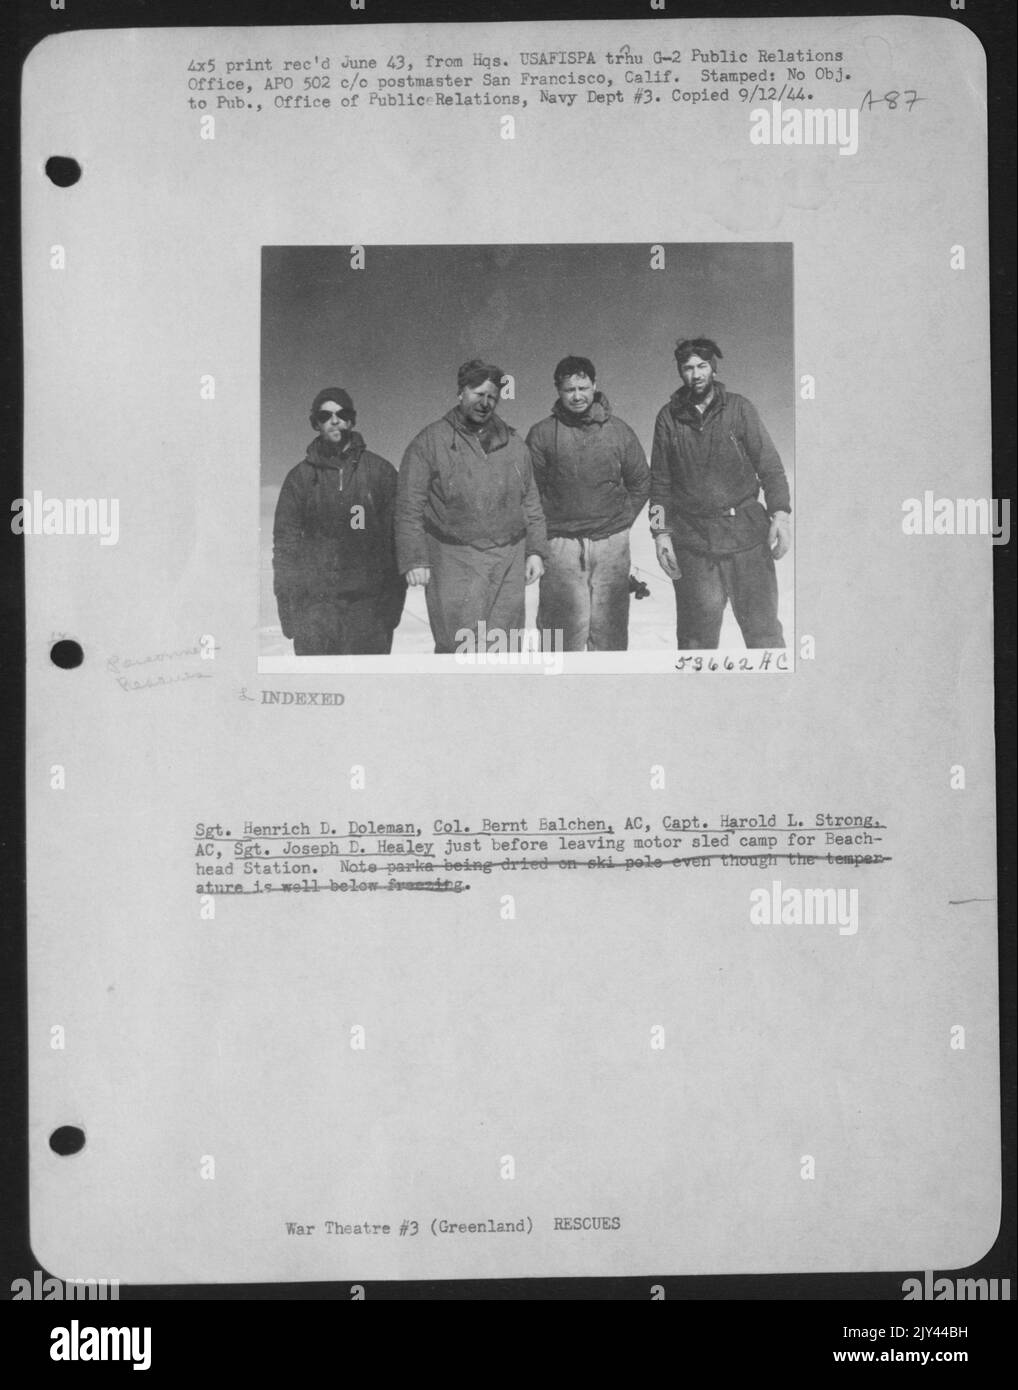 Sergeant Henrich Doleman, Colonel Bernt Balchen, Ac, Captain Harold L. Strong, Ac And Sergeant Joseph D. Healey Just Before Leaving Motor Sled Camp For Beachhead Station. Stock Photo